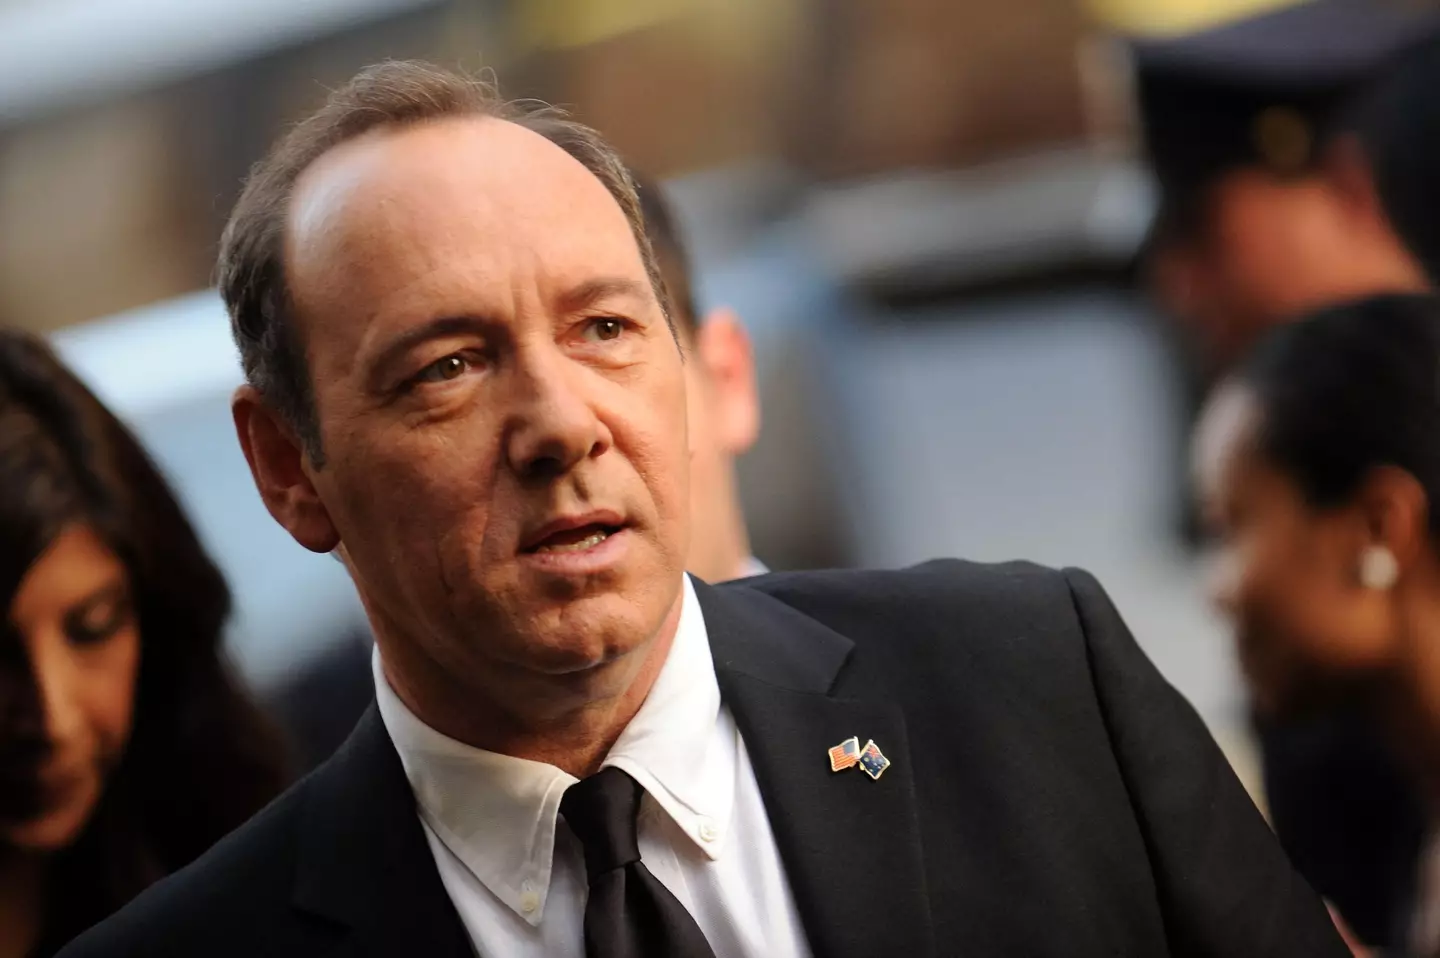 Kevin Spacey is set to star in a new historical drama.